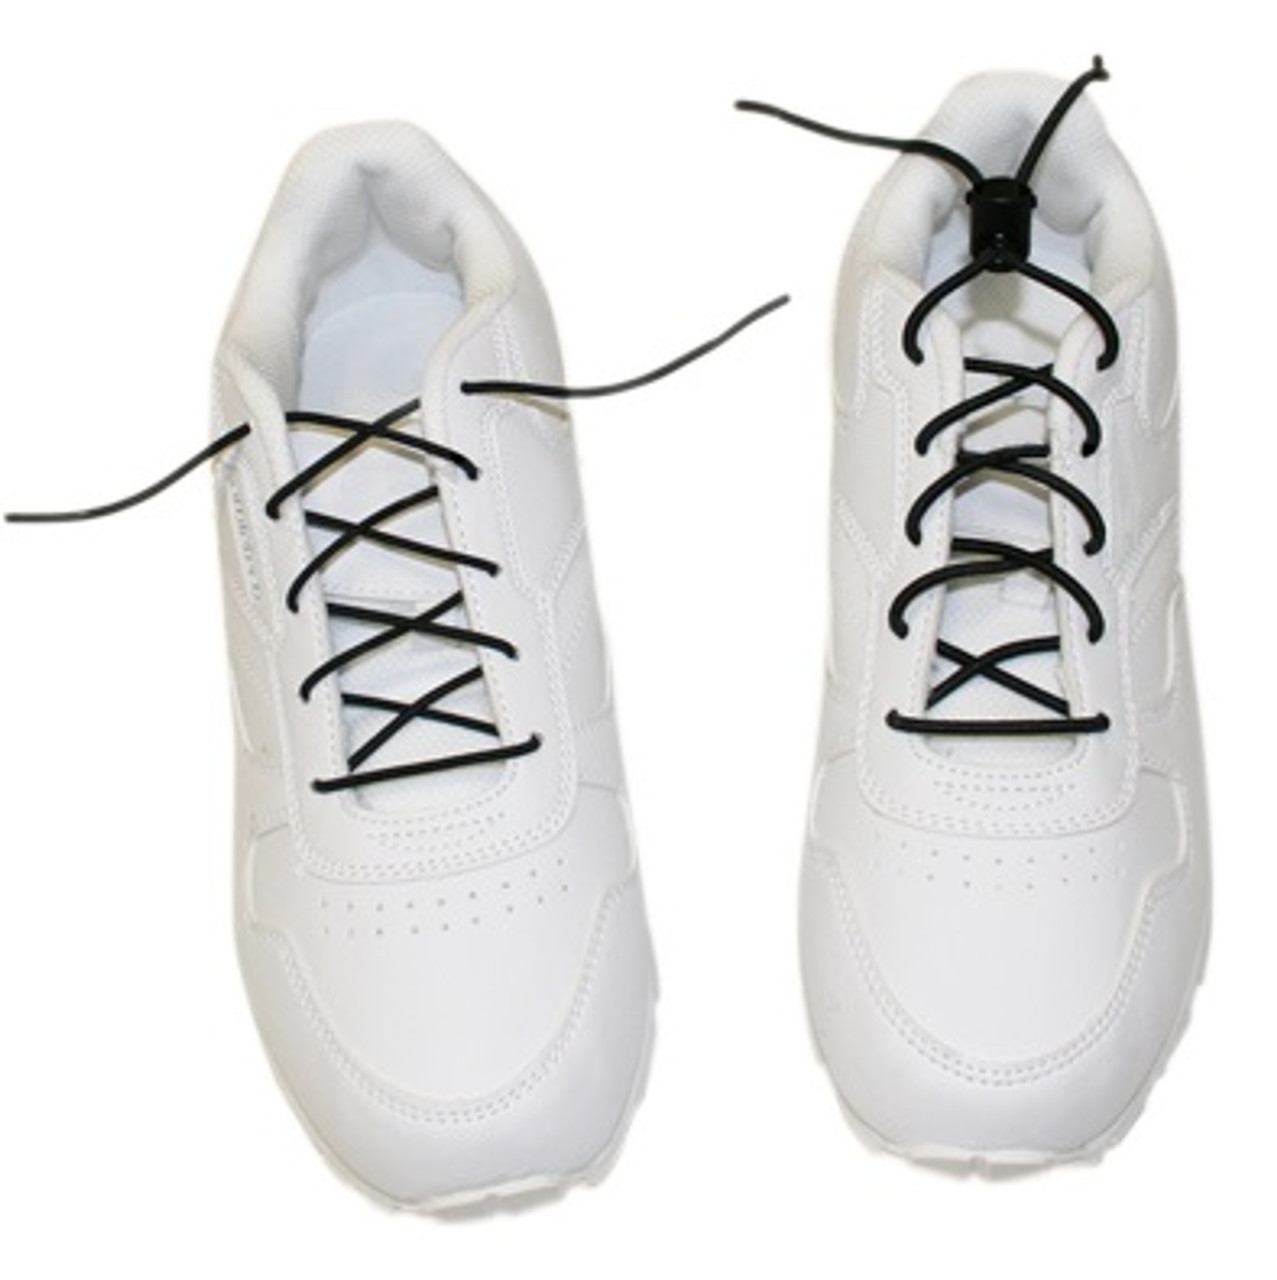 Elastic Shoe Laces with Cord-Lock (1 Pair, White Color)